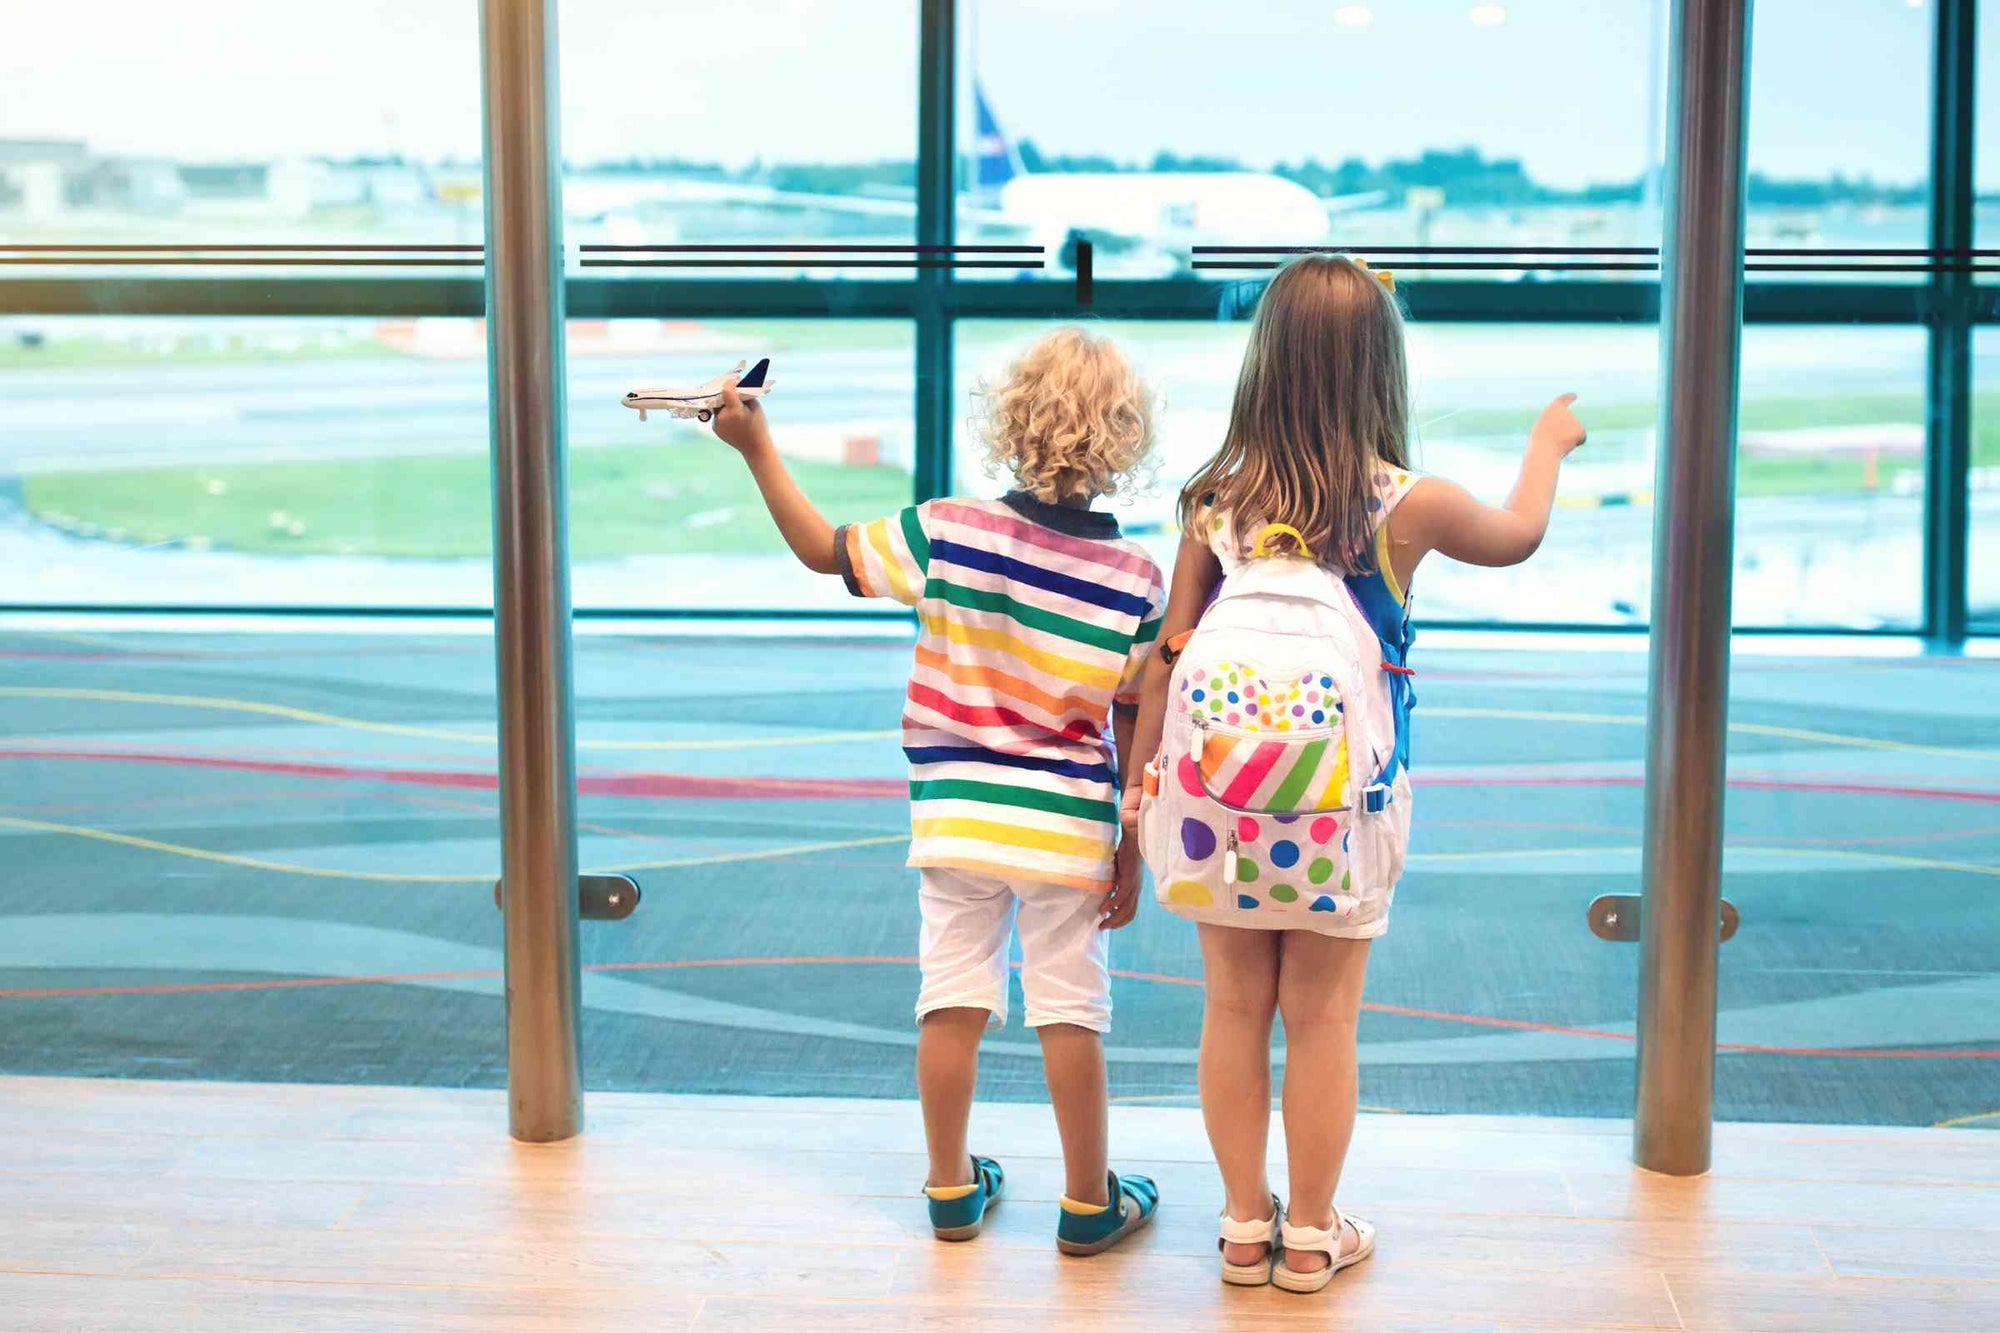 Travelling with kids: 5 top tips for planning the perfect family trip